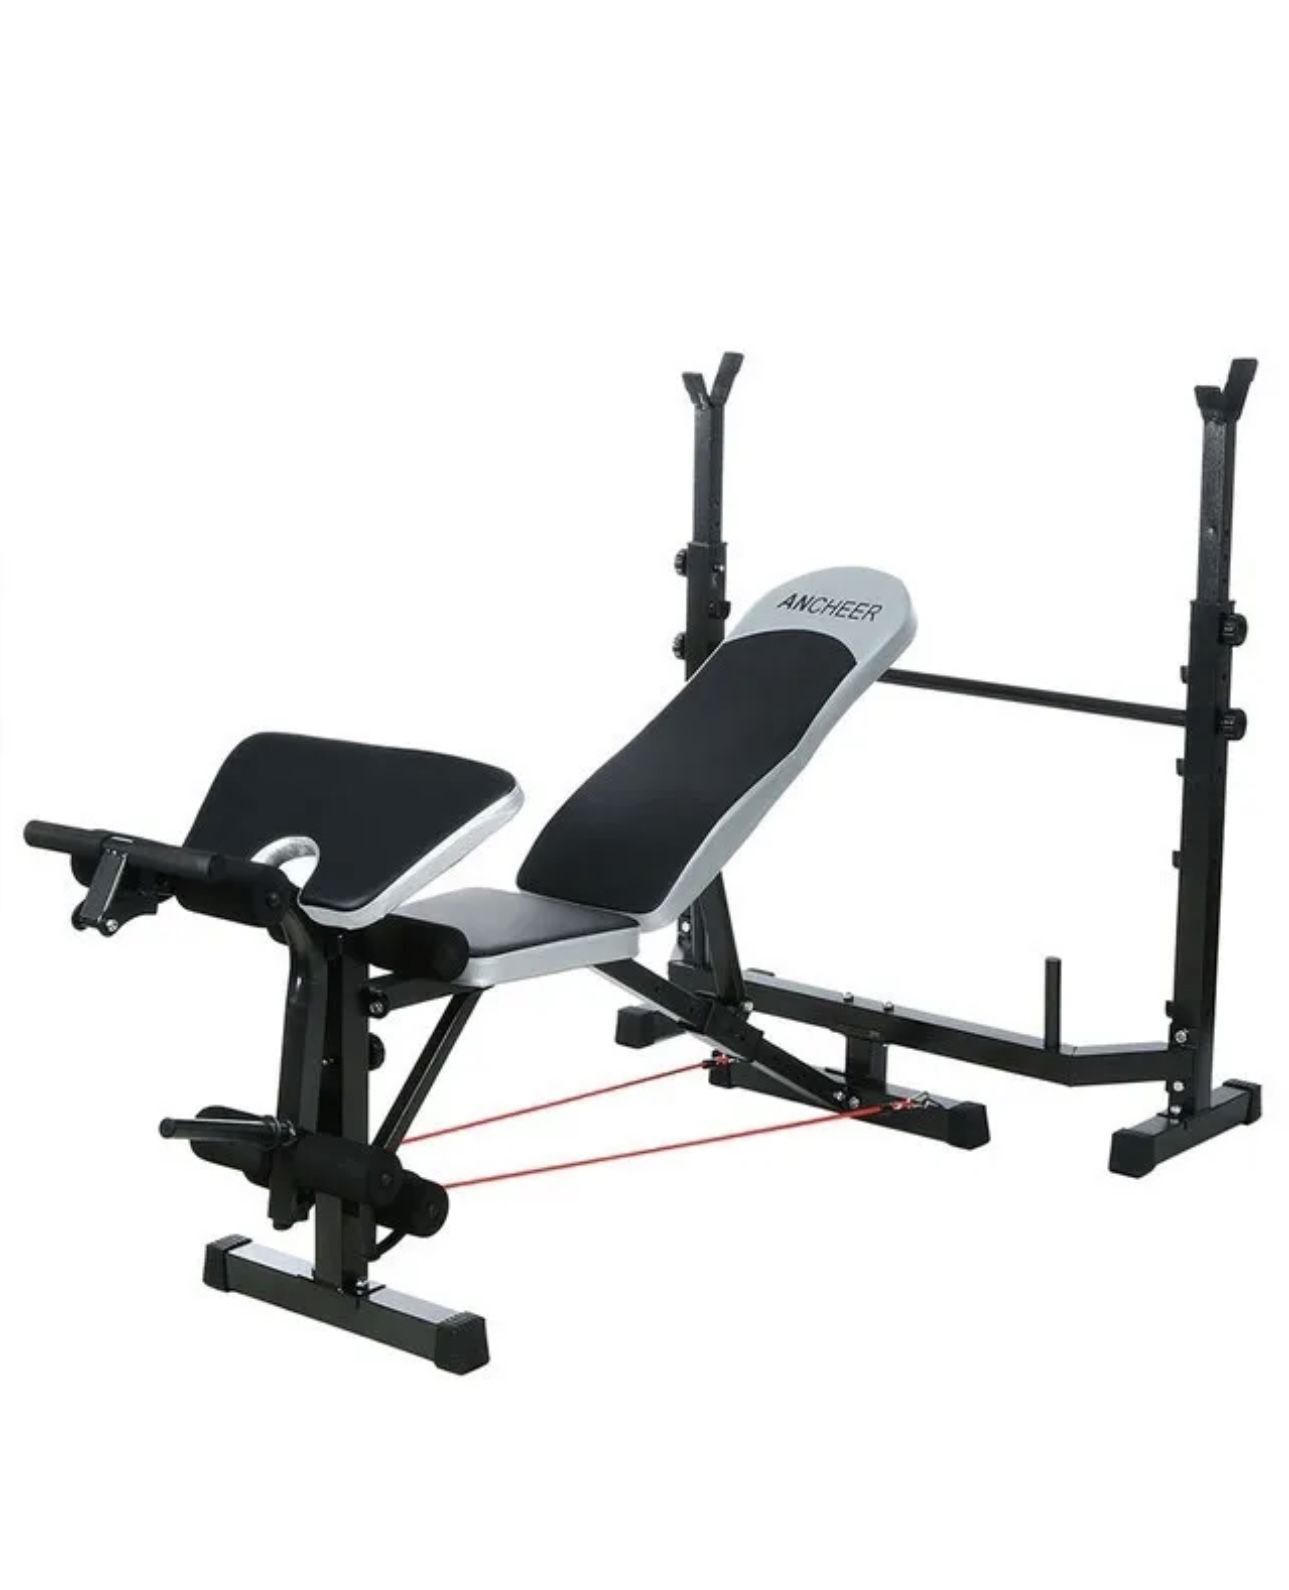 Olympic Weight Bench $125 - Ancheer Brand